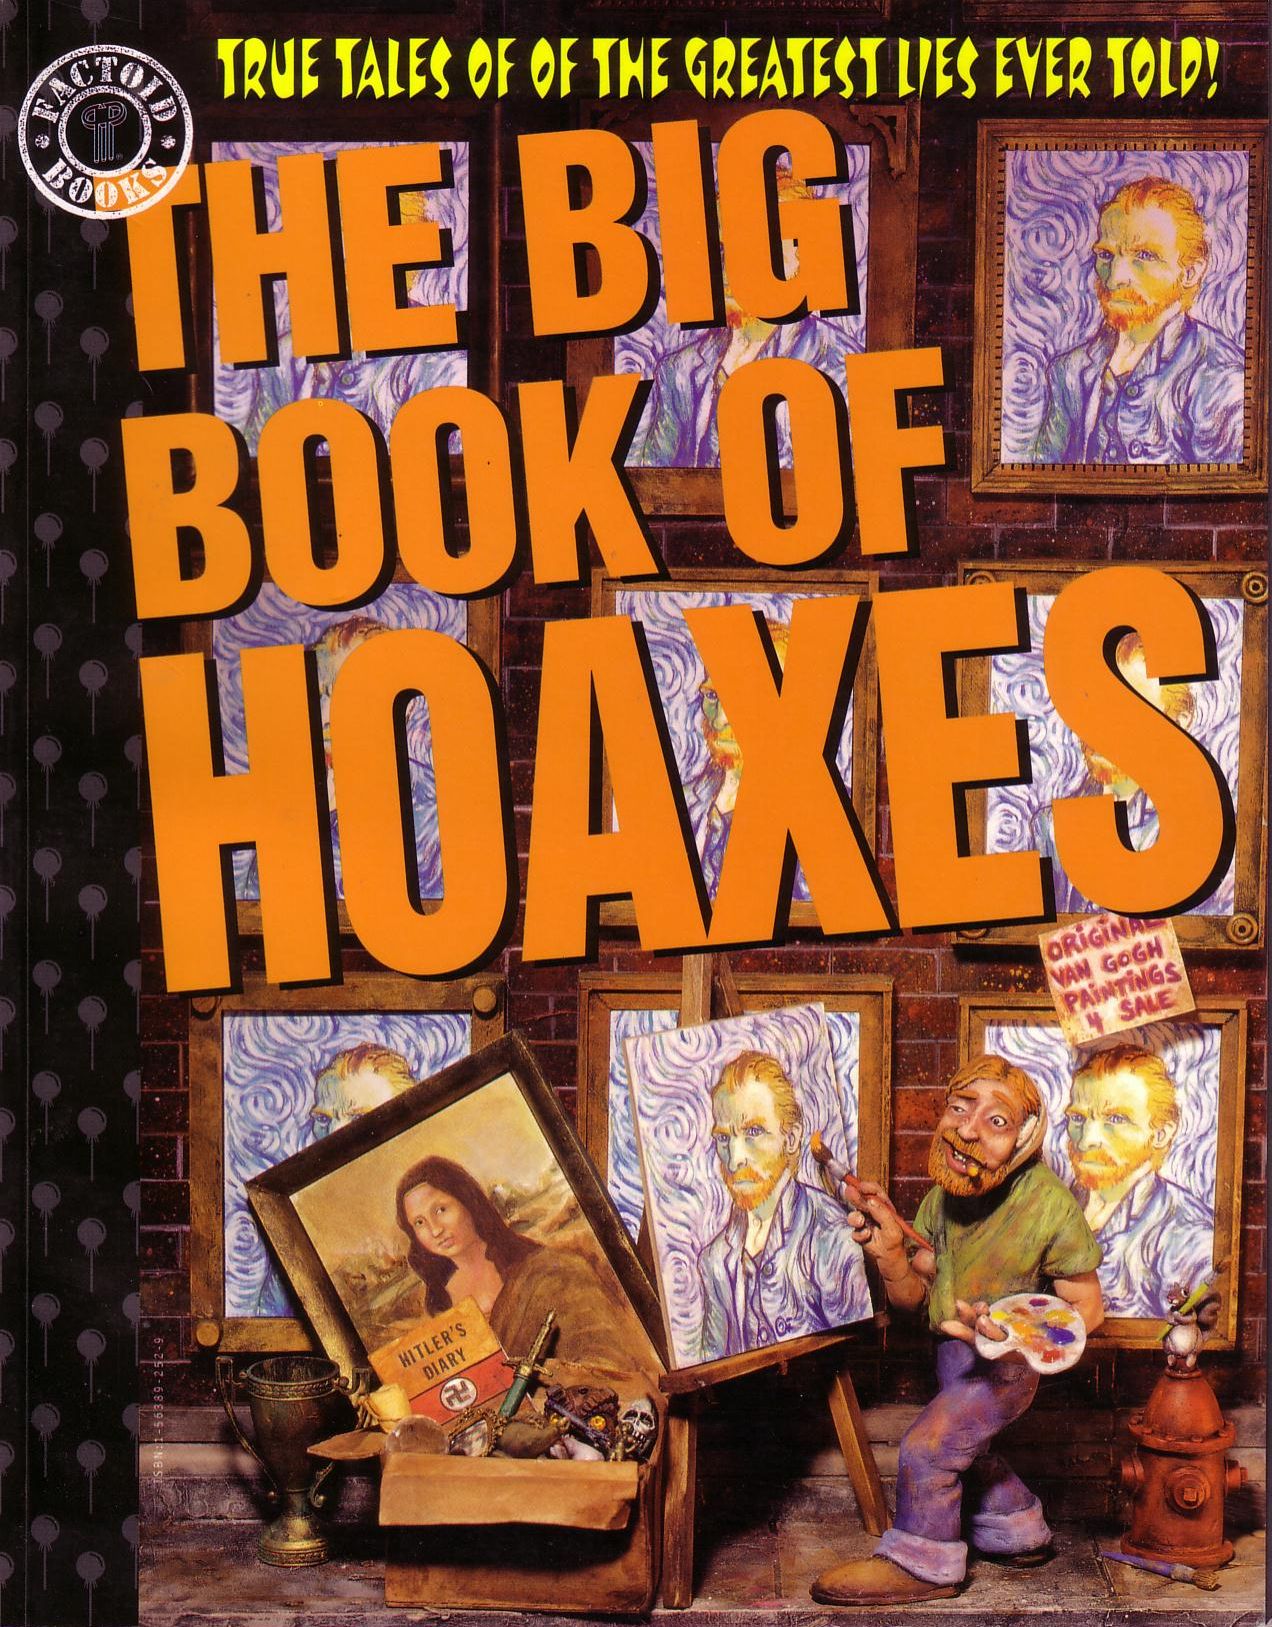 Read online The Big Book of... comic -  Issue # TPB Hoaxes - 1